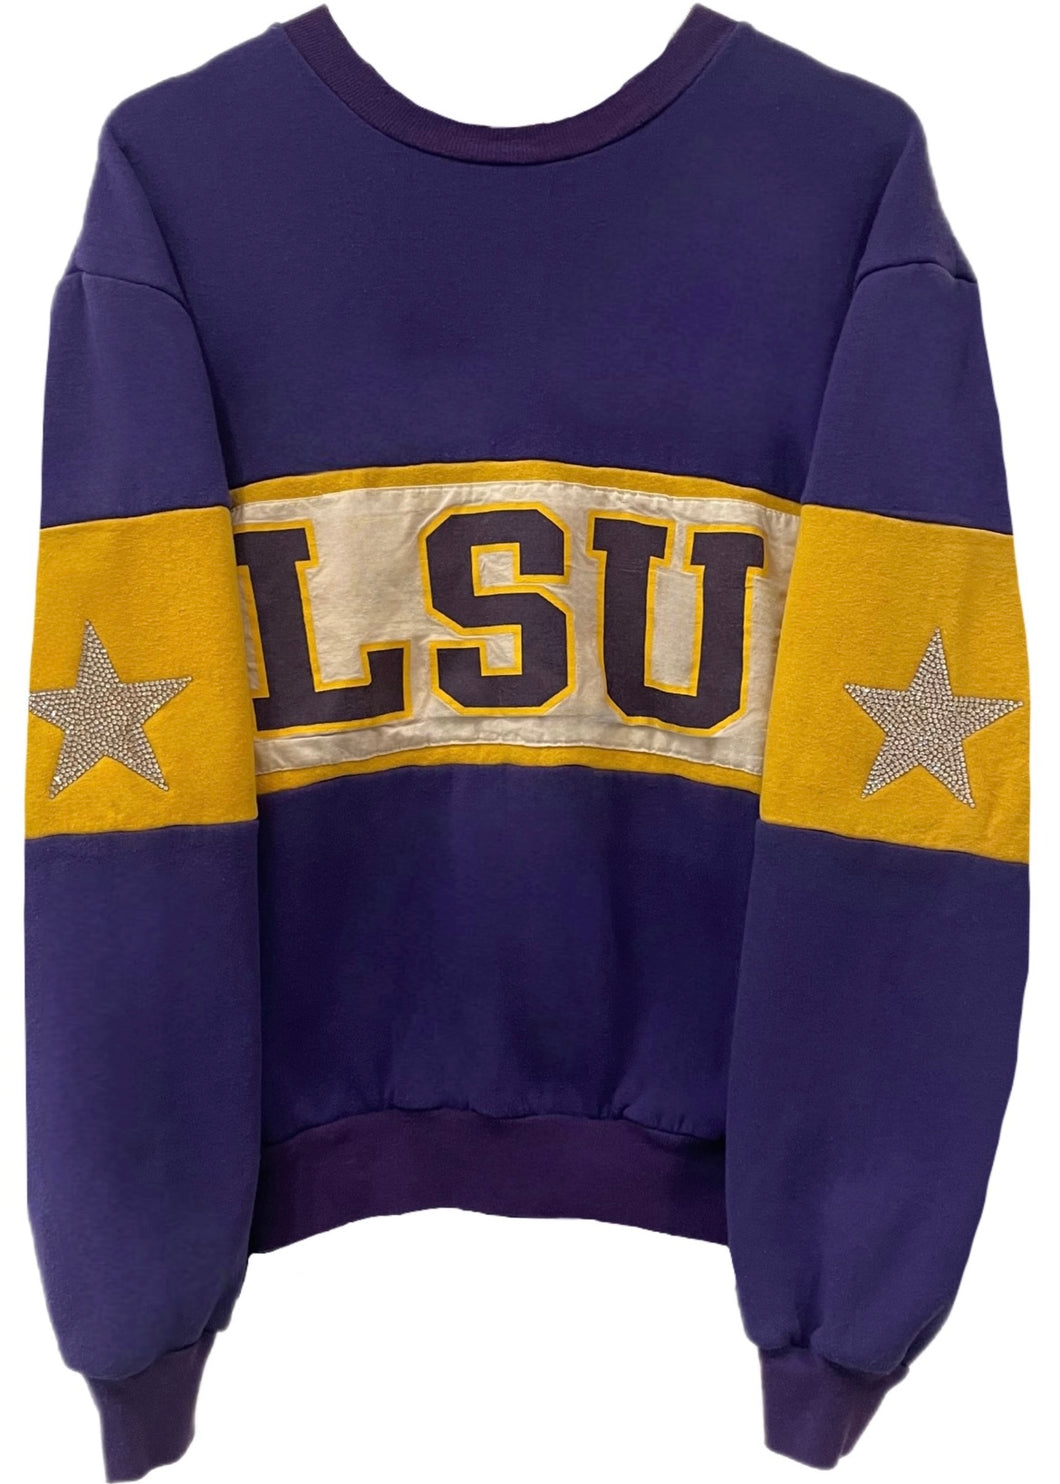 Louisiana State University, LSU Tigers One of a KIND Vintage Sweatshirt with Crystal Star Design